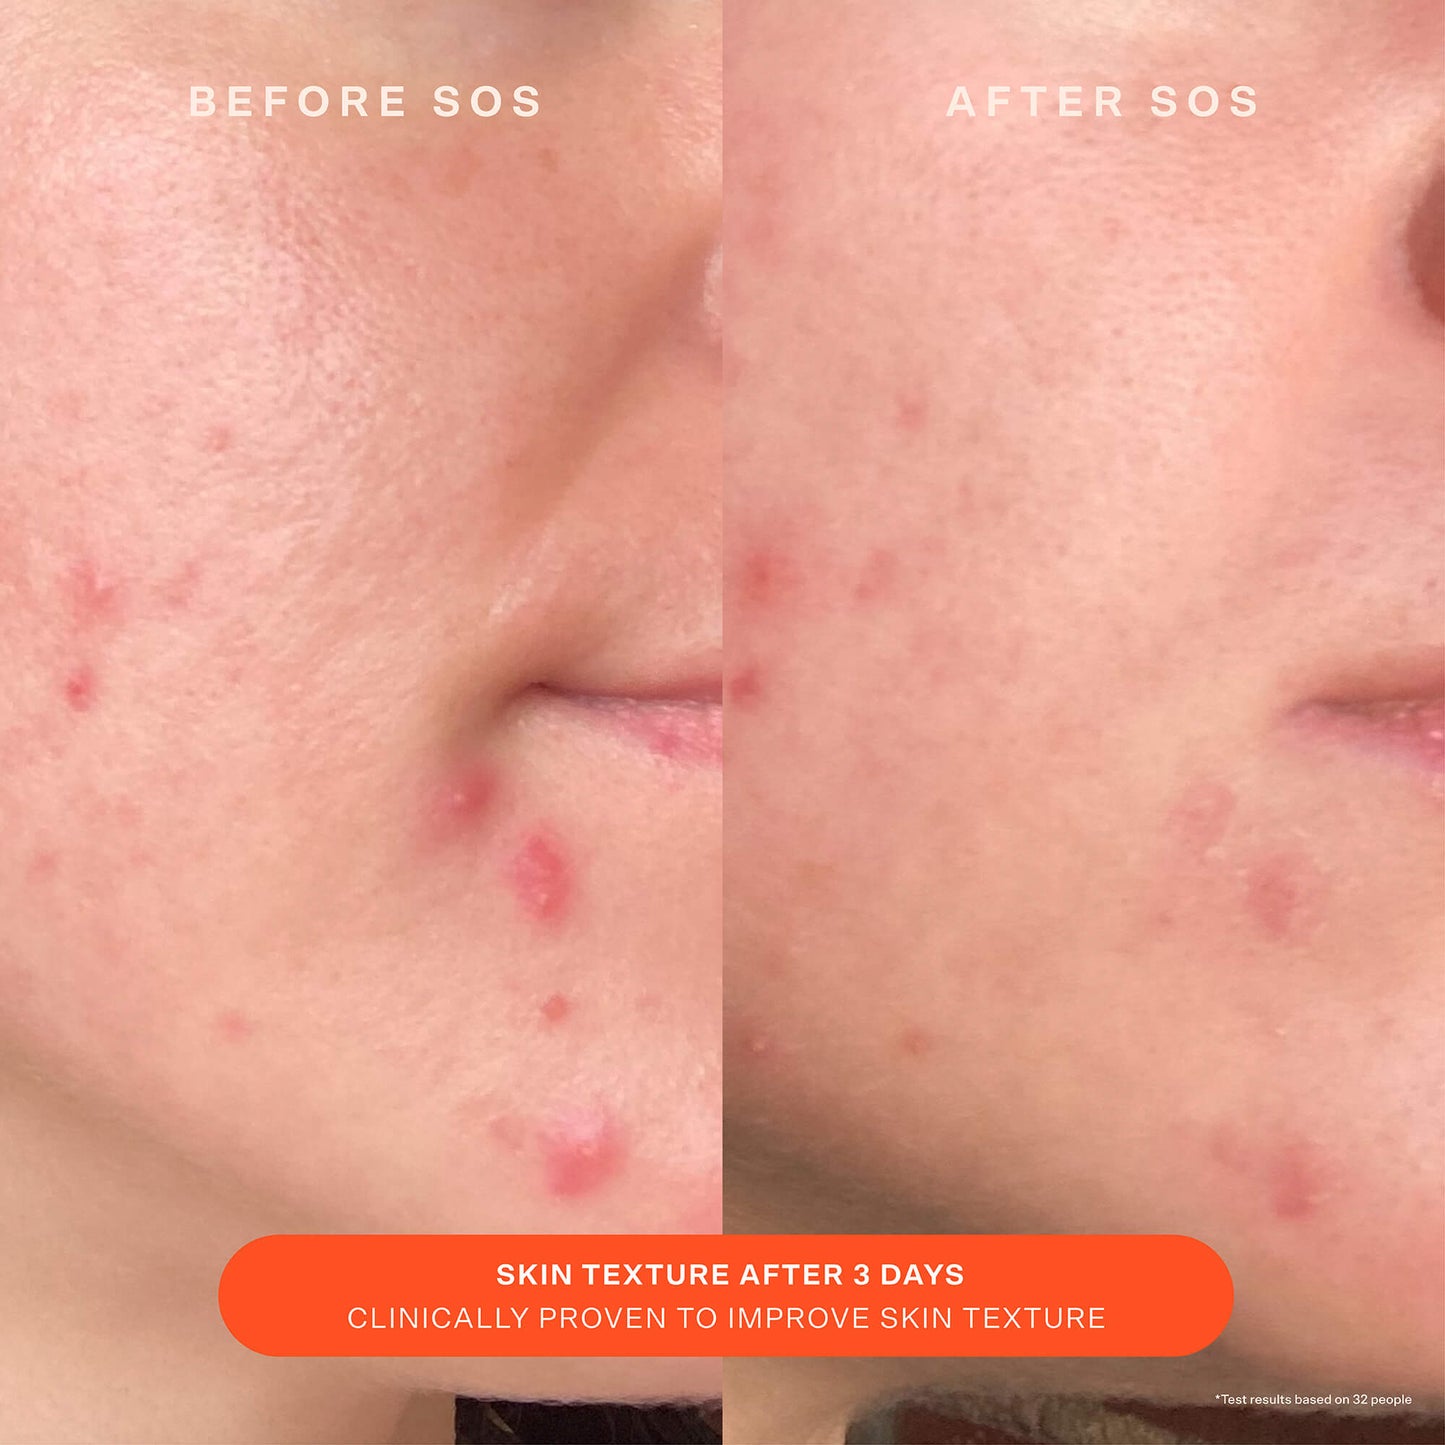 [Shared: A comparison before and after the use of Tower 28 Beauty SOS Recovery Cream. "Skin texture after 3 days. Clinically proven to improve skin texture"]